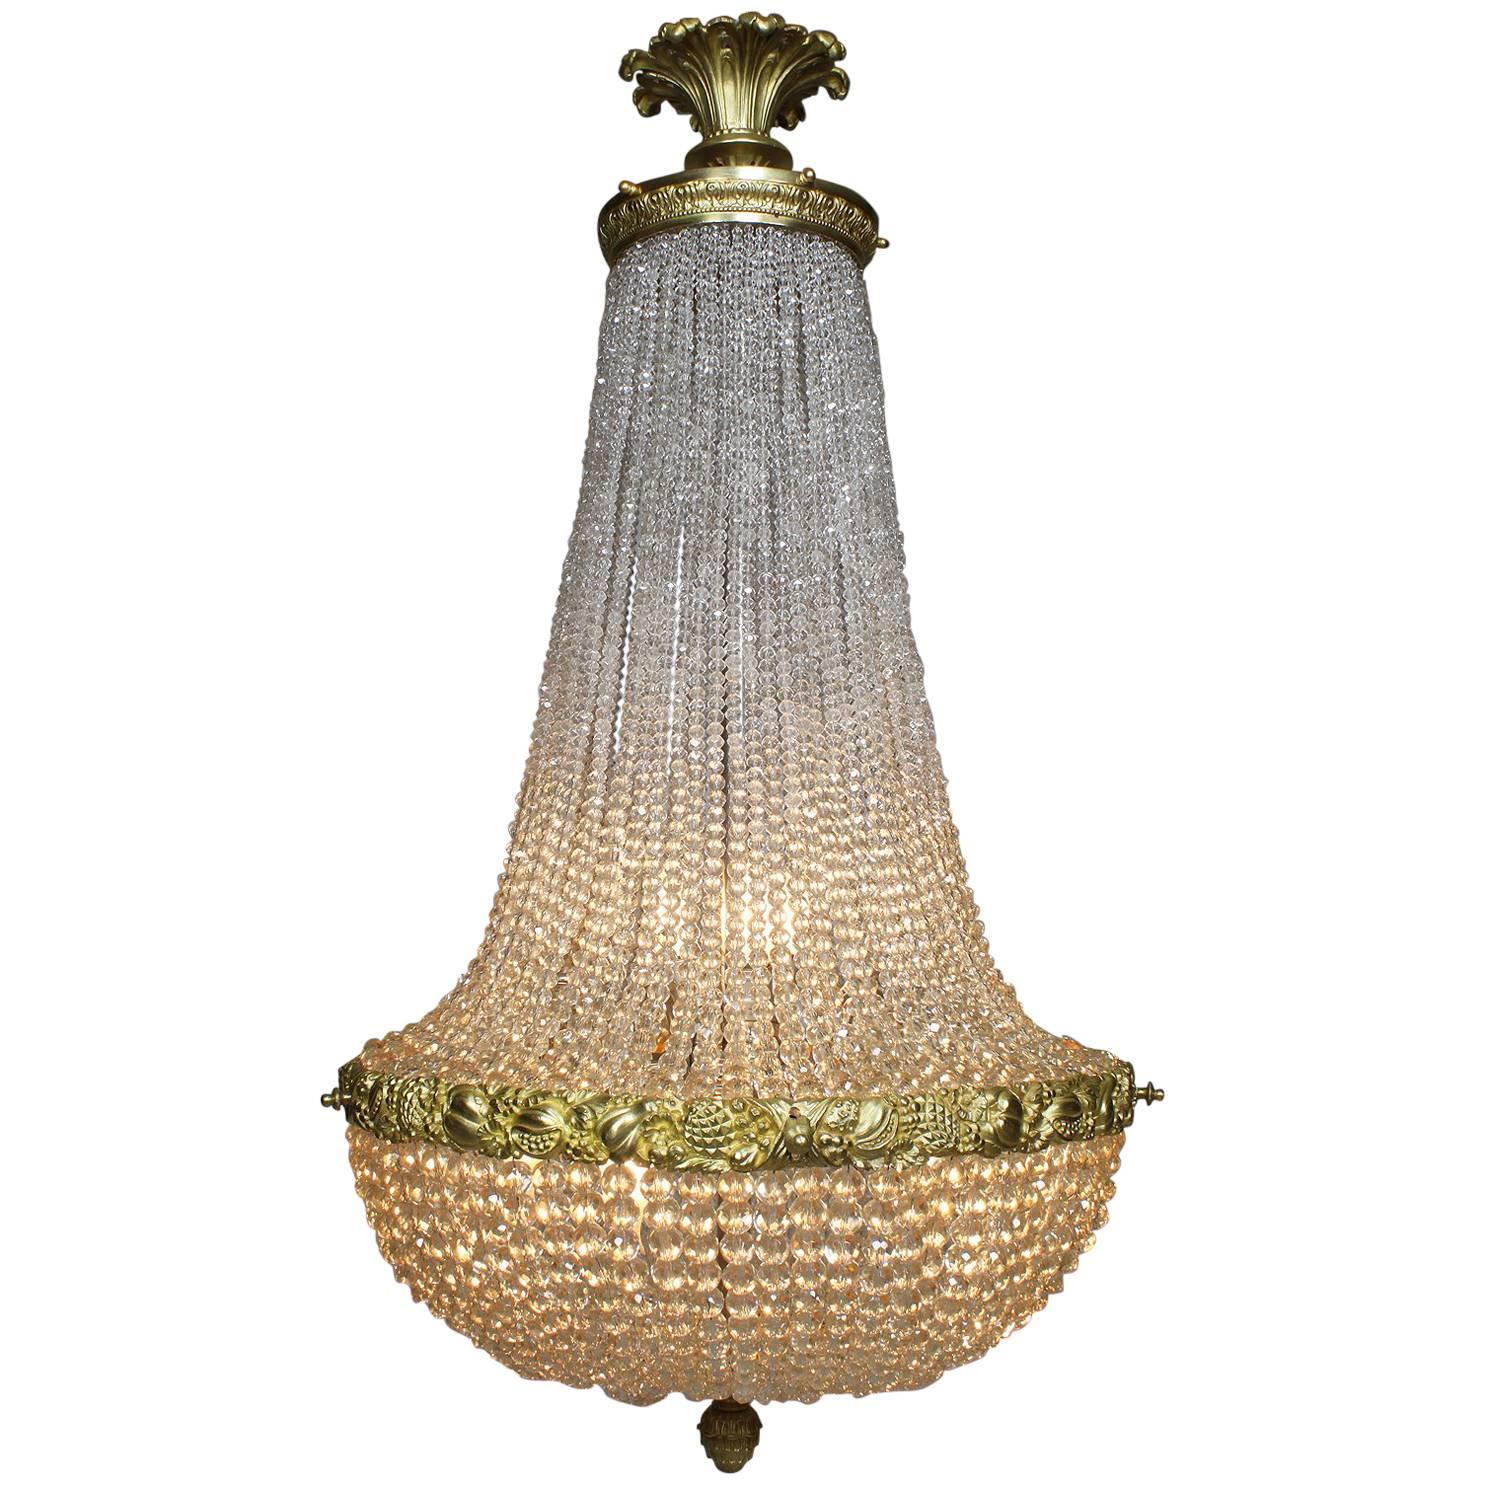 French 19th Century Louis XVI Style Gilt-Bronze and Cut-Glass Chandelier For Sale